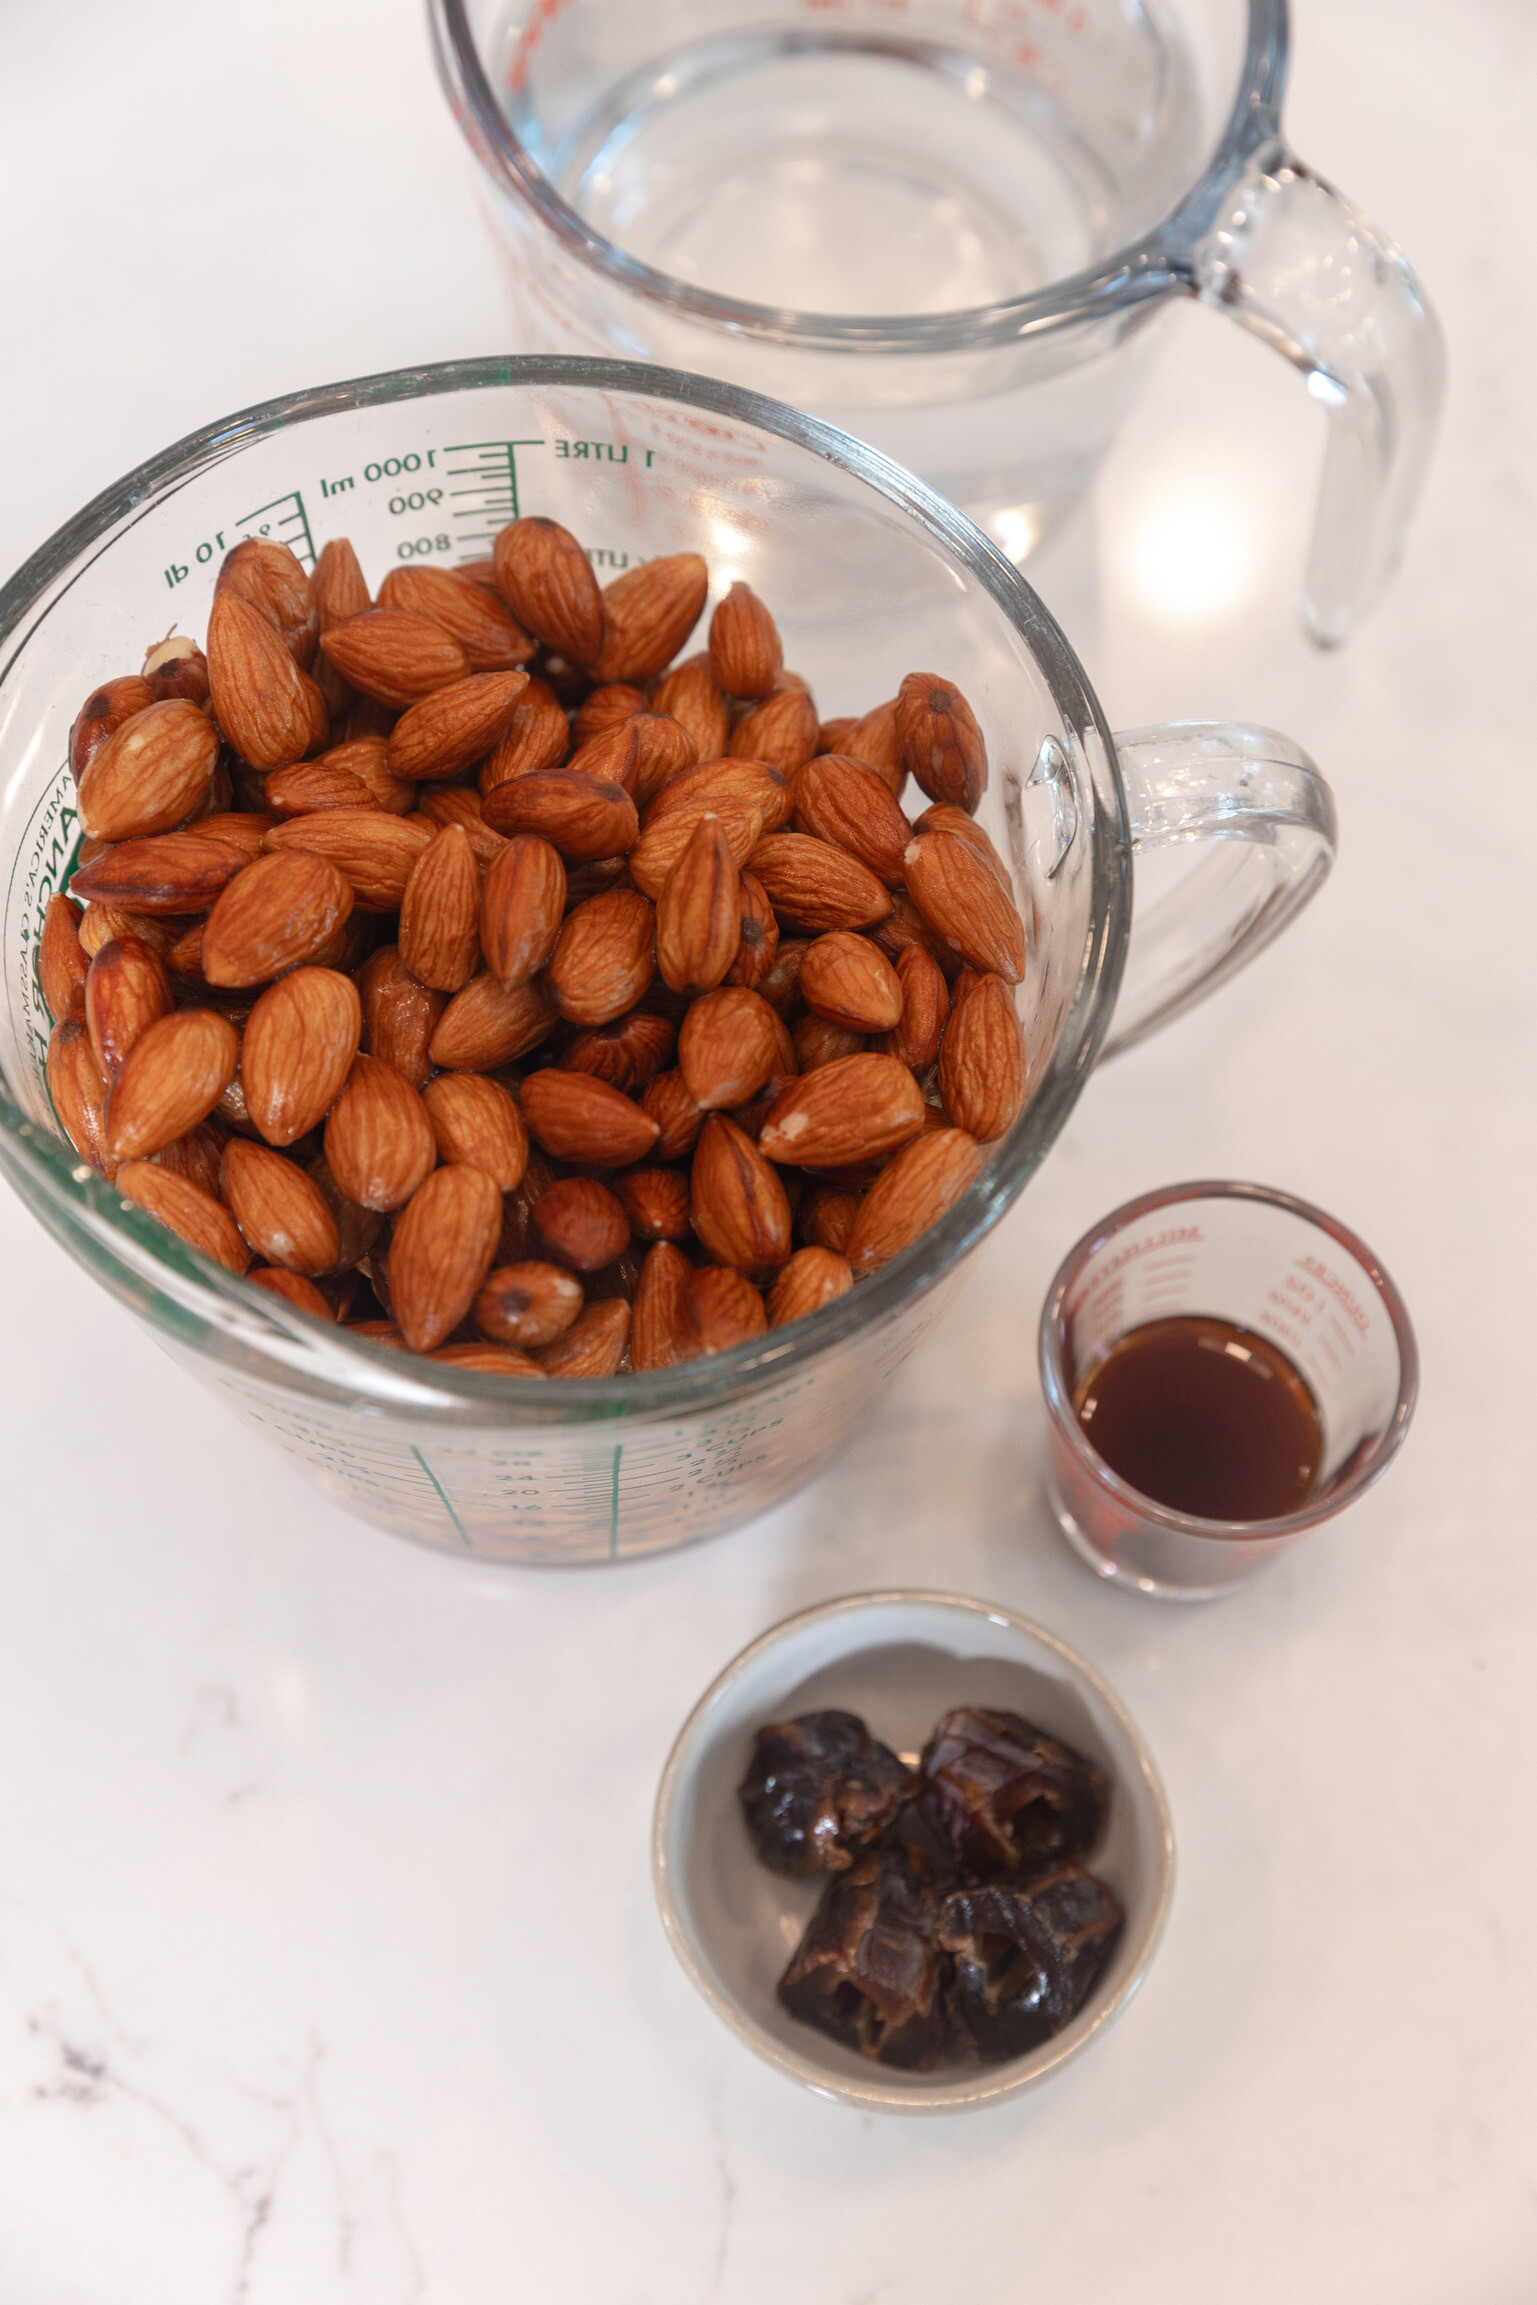 Measuring cup of raw almonds next to measuring cup of water, with a small cup of dates and small cup of vanilla extract.